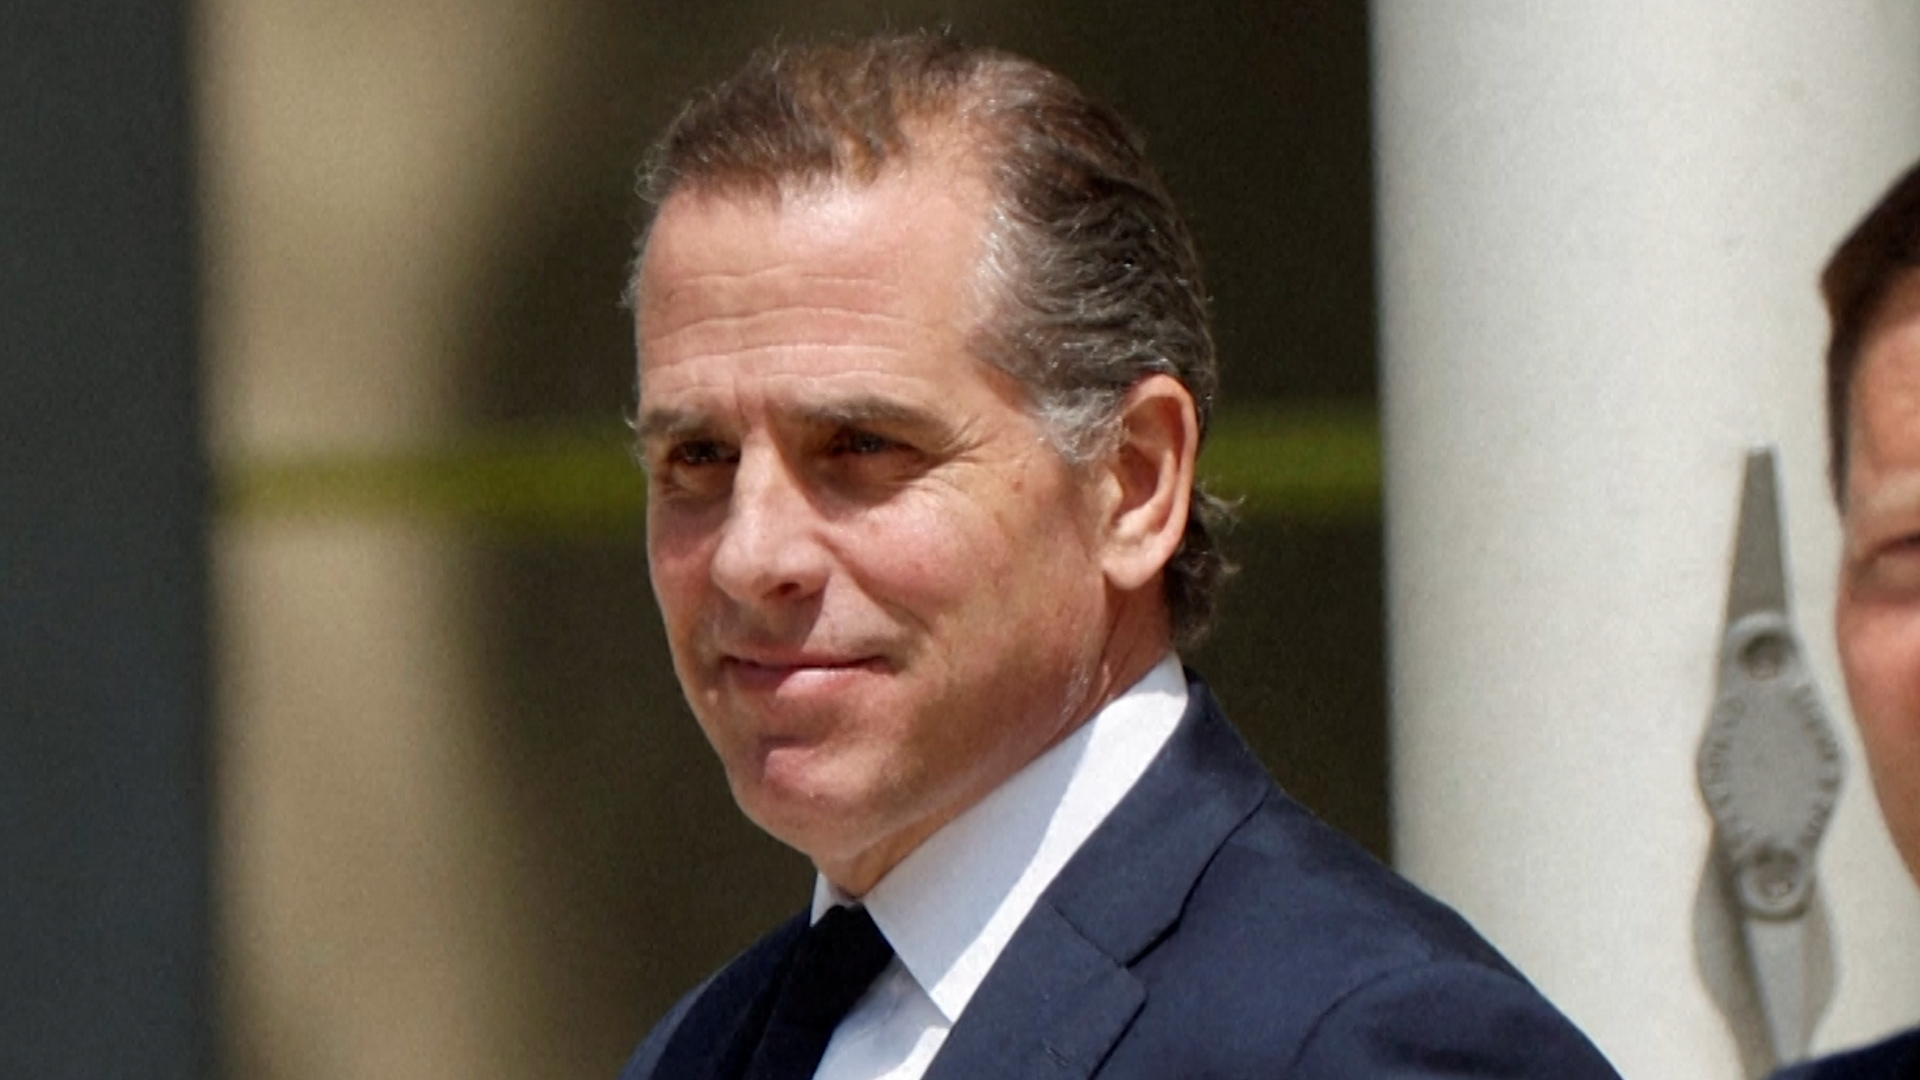 Special counsel appointed for additional investigation into Hunter Biden